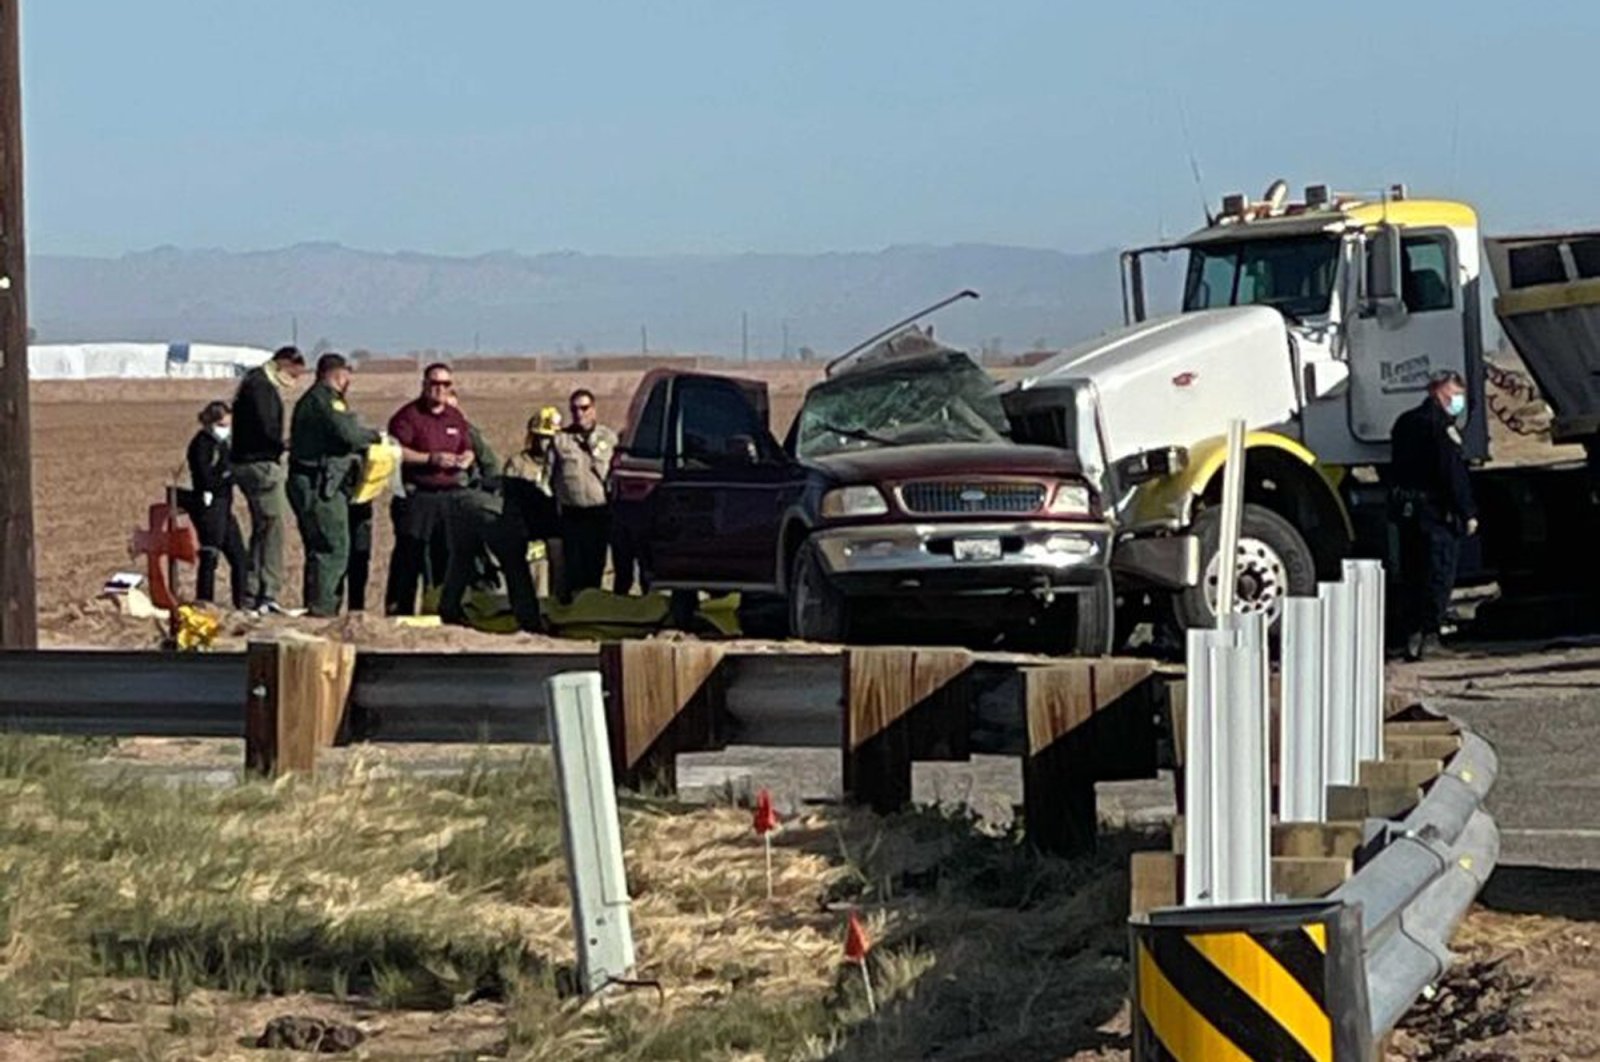 In this image from KYMA law enforcement work at the scene of a deadly crash involving a semitruck and an SUV in Holtville, Calif., on Tuesday, March 2, 2021. (KYMA via AP)